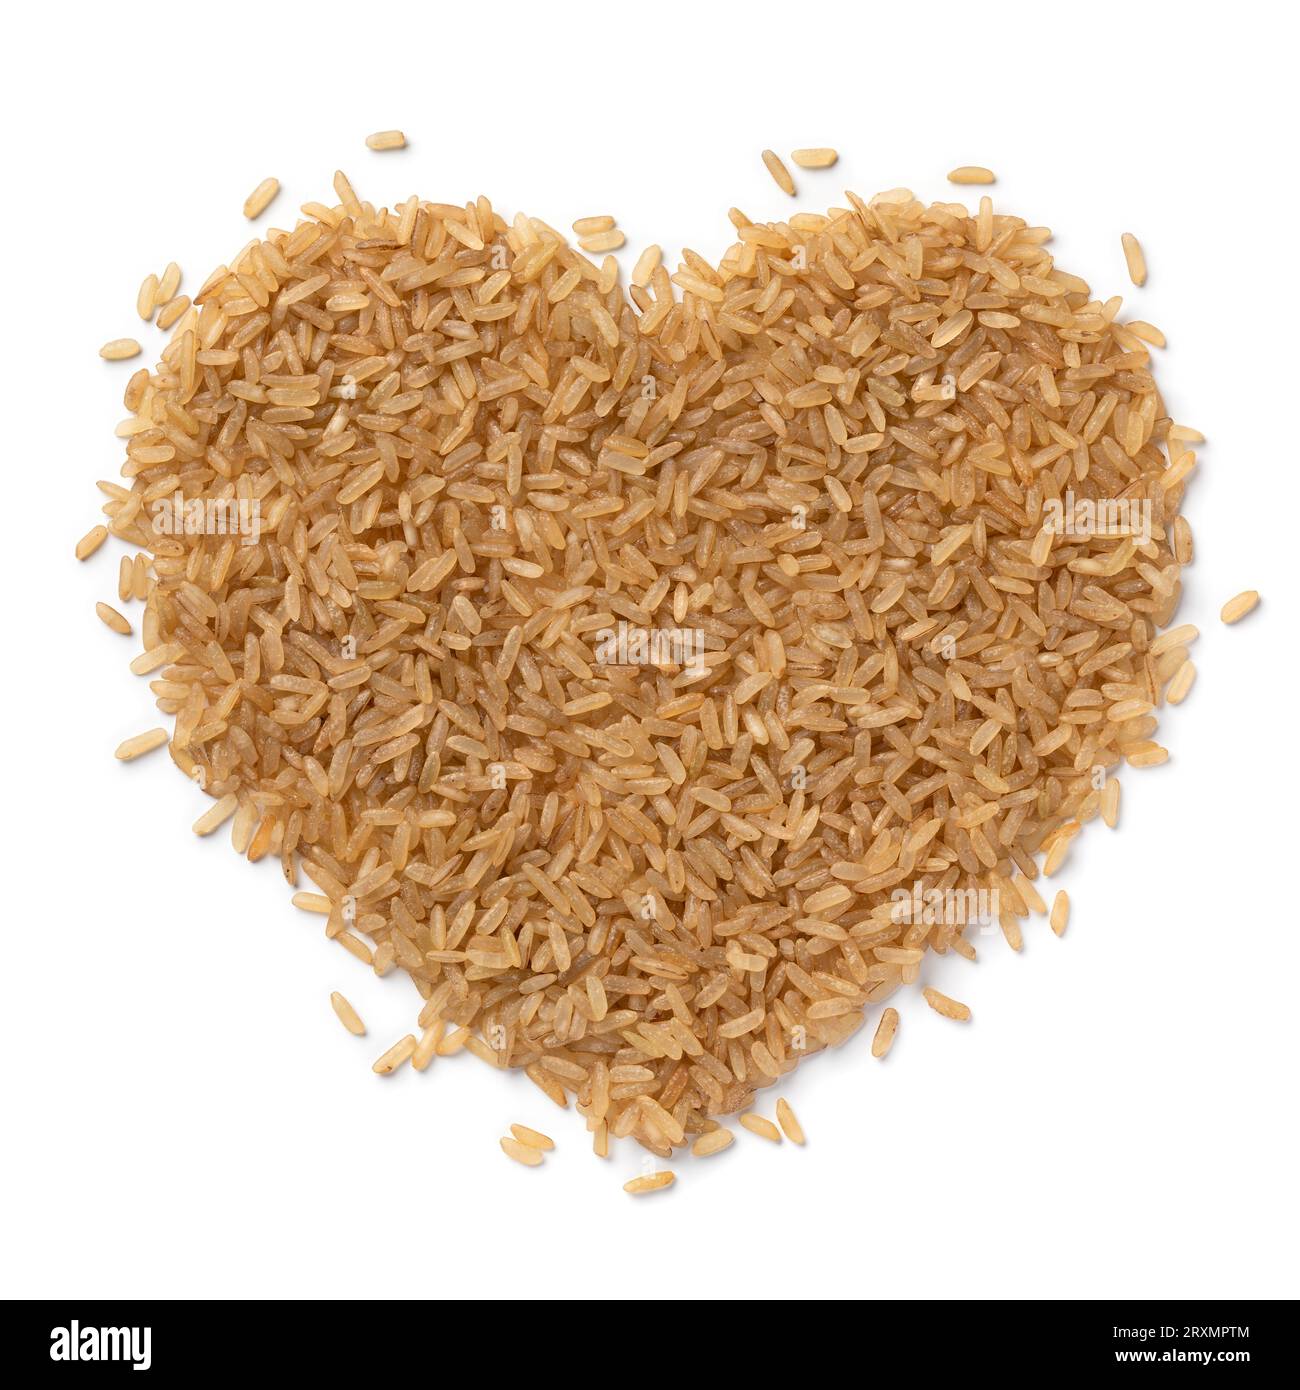 Organic brown rice in heart shape isolated on white background close up Stock Photo